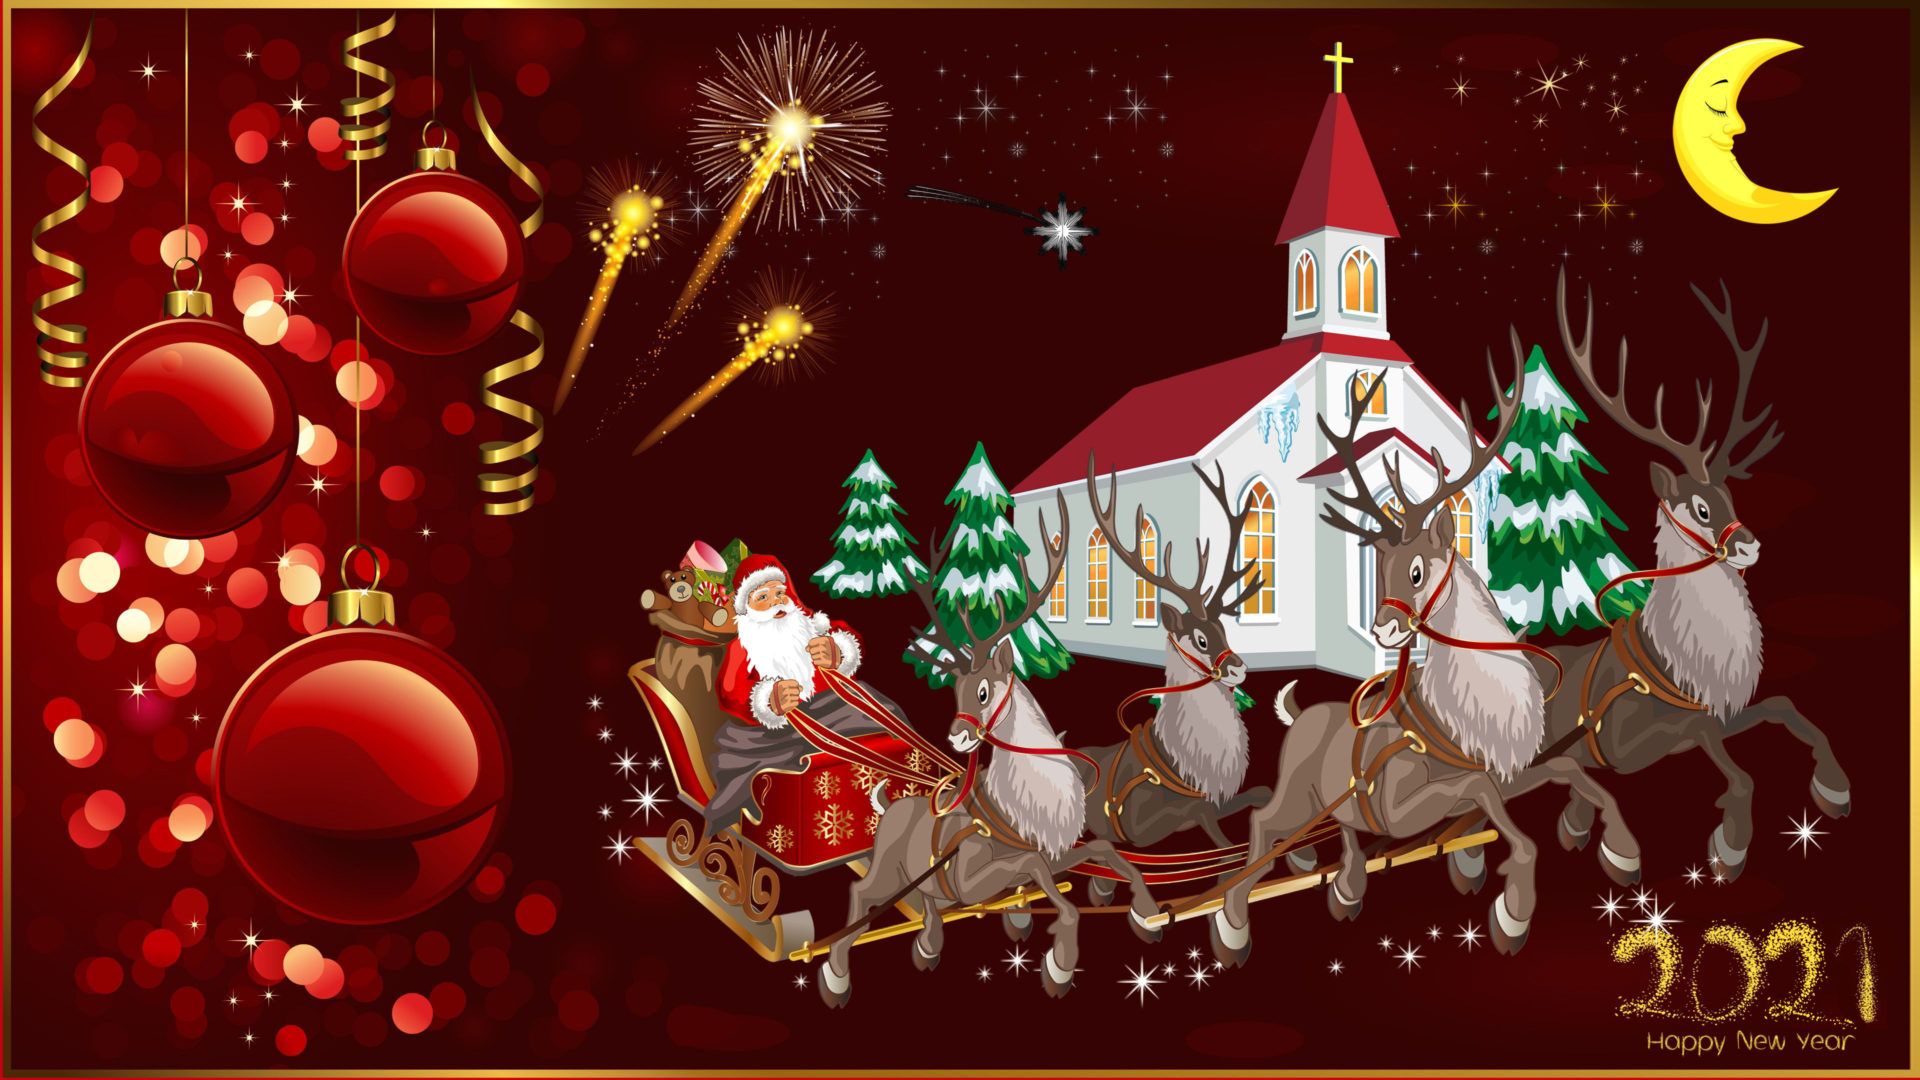 Happy New Year 2021 Merry Christmas Christmas Greeting Card Santa Claus And Reindeer Church Christmas Decorations Fireworks Moon HD Desktop Wallpaper For Computers Laptop Tablet And Mobile Phones, Wallpaper13.com